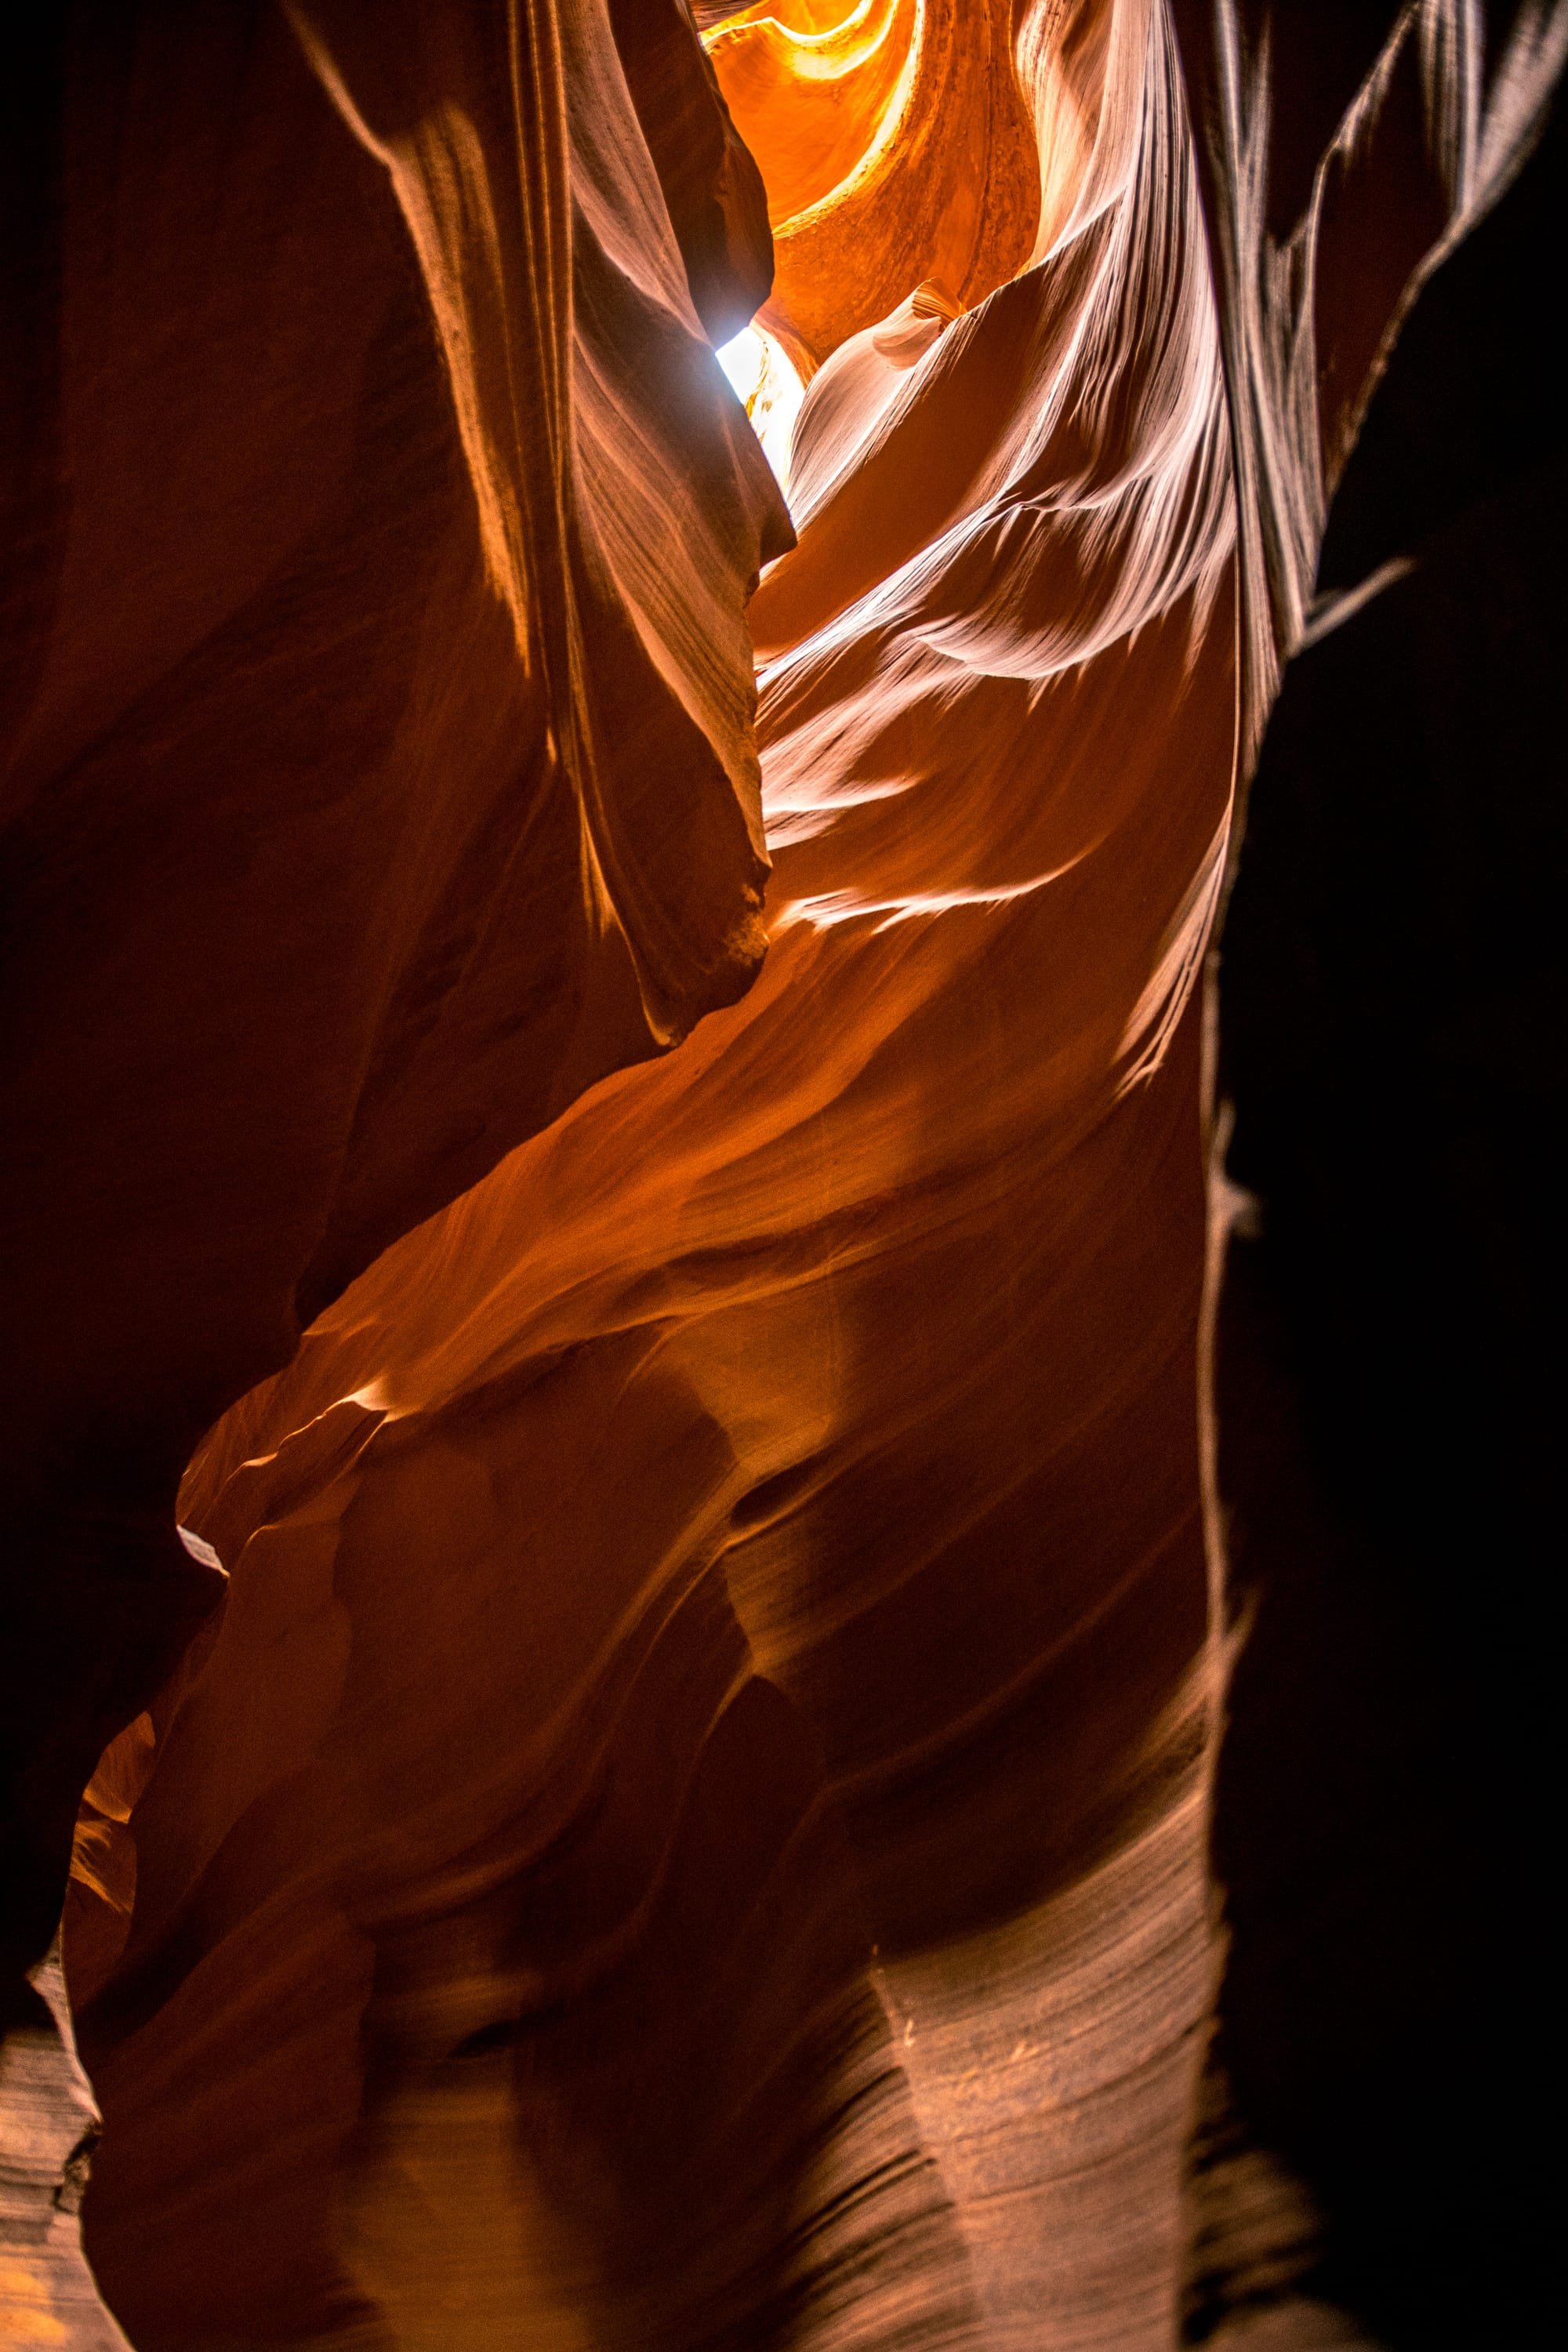 ANTELOPE CANYON - "GIRL IN A DRESS"